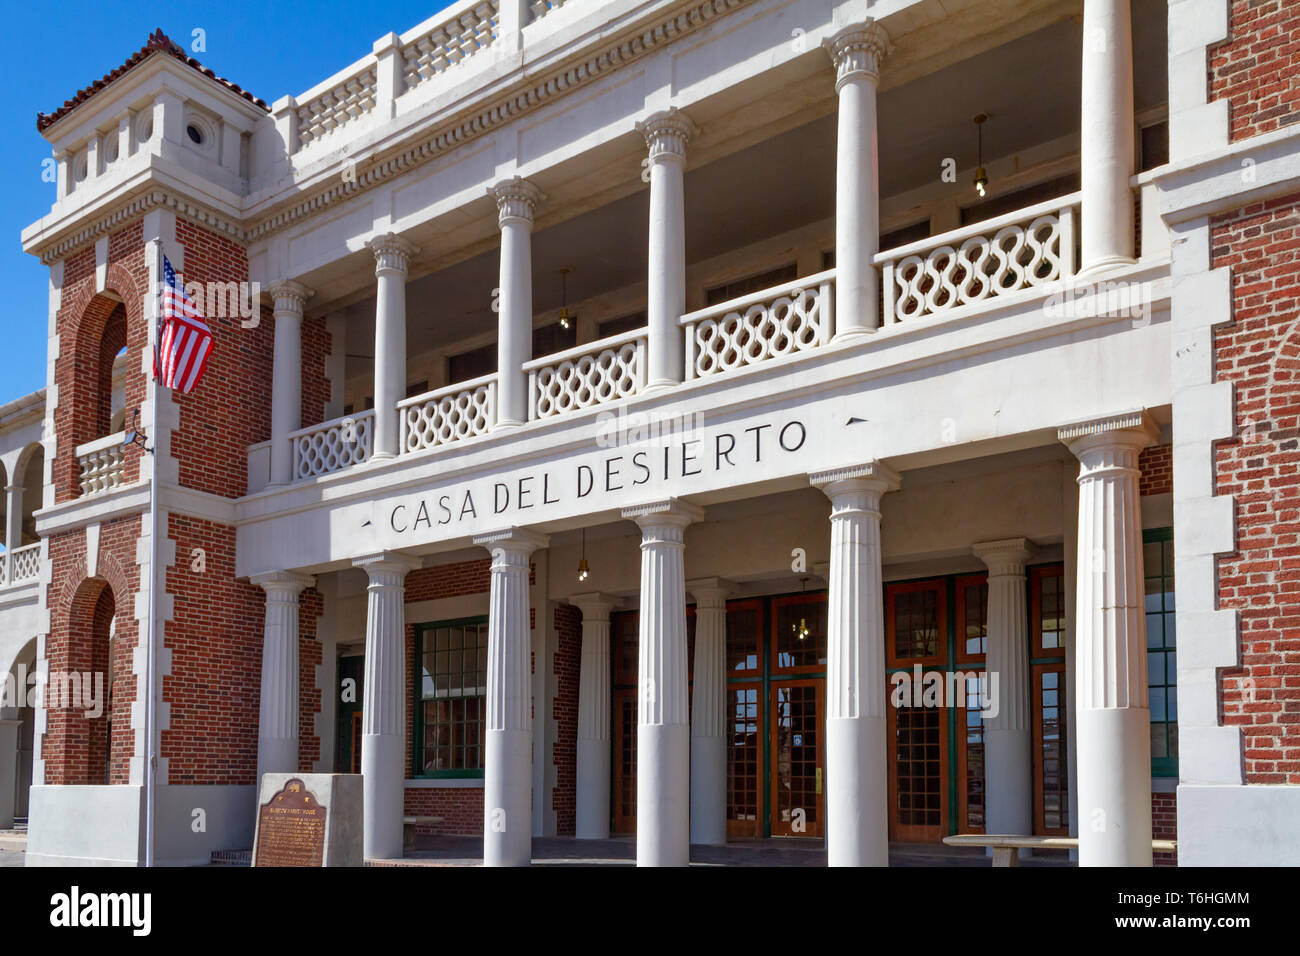 Barstow, CA / USA – April 14, 2019: Casa Del Desierto, also known as the Barstow Harvey House, is a historical landmark located at 685 North 1st Avenu Stock Photo